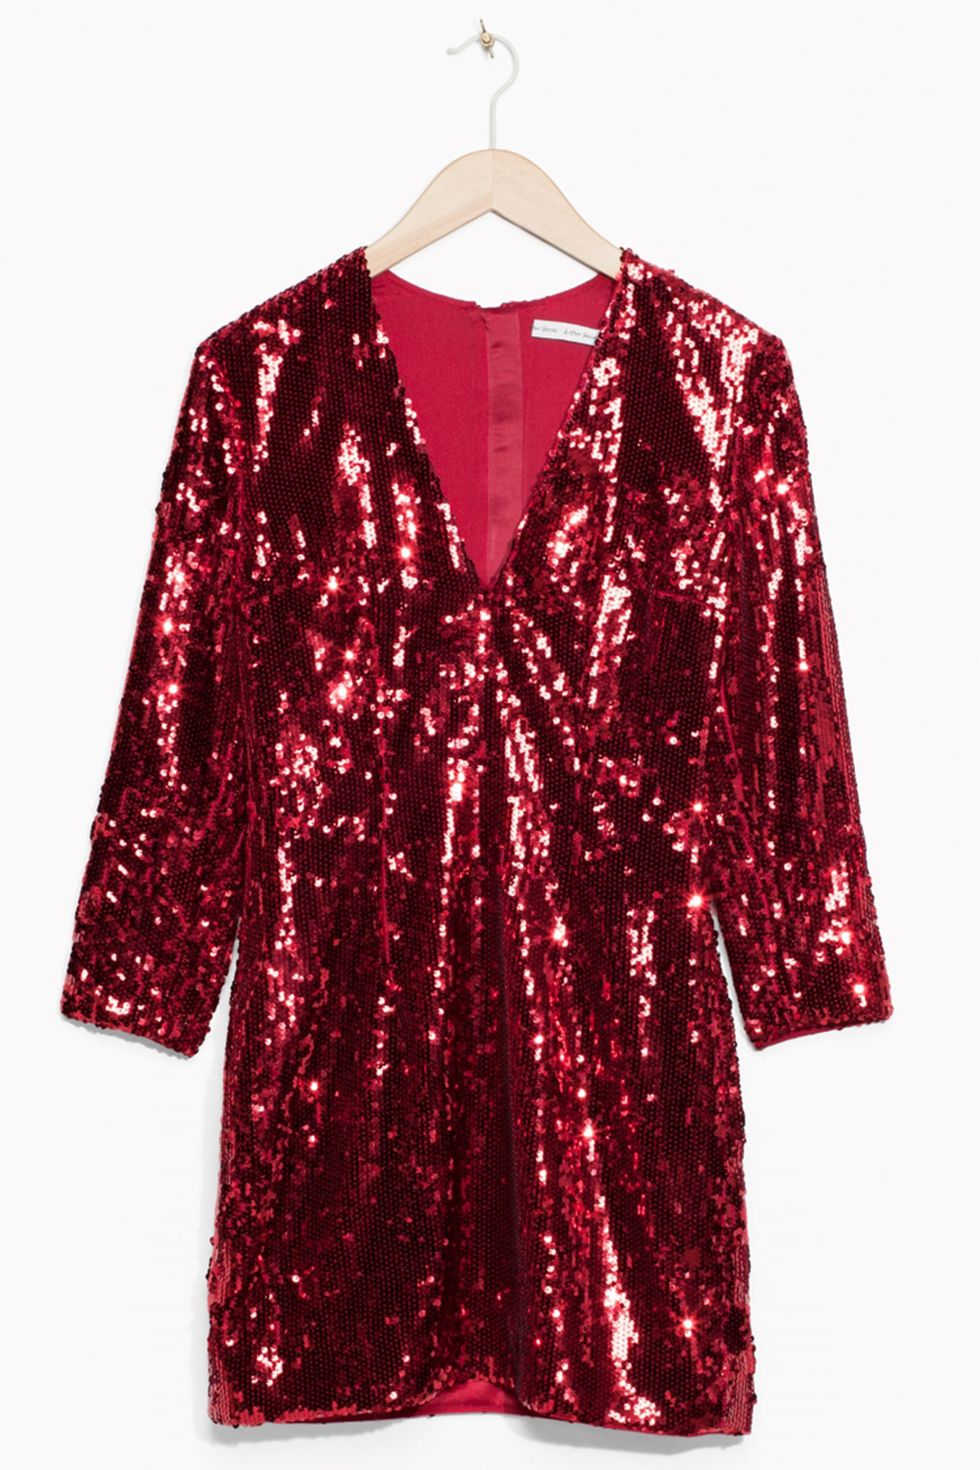 red dresses, best red dresses, red party dresses, red sequin dresses